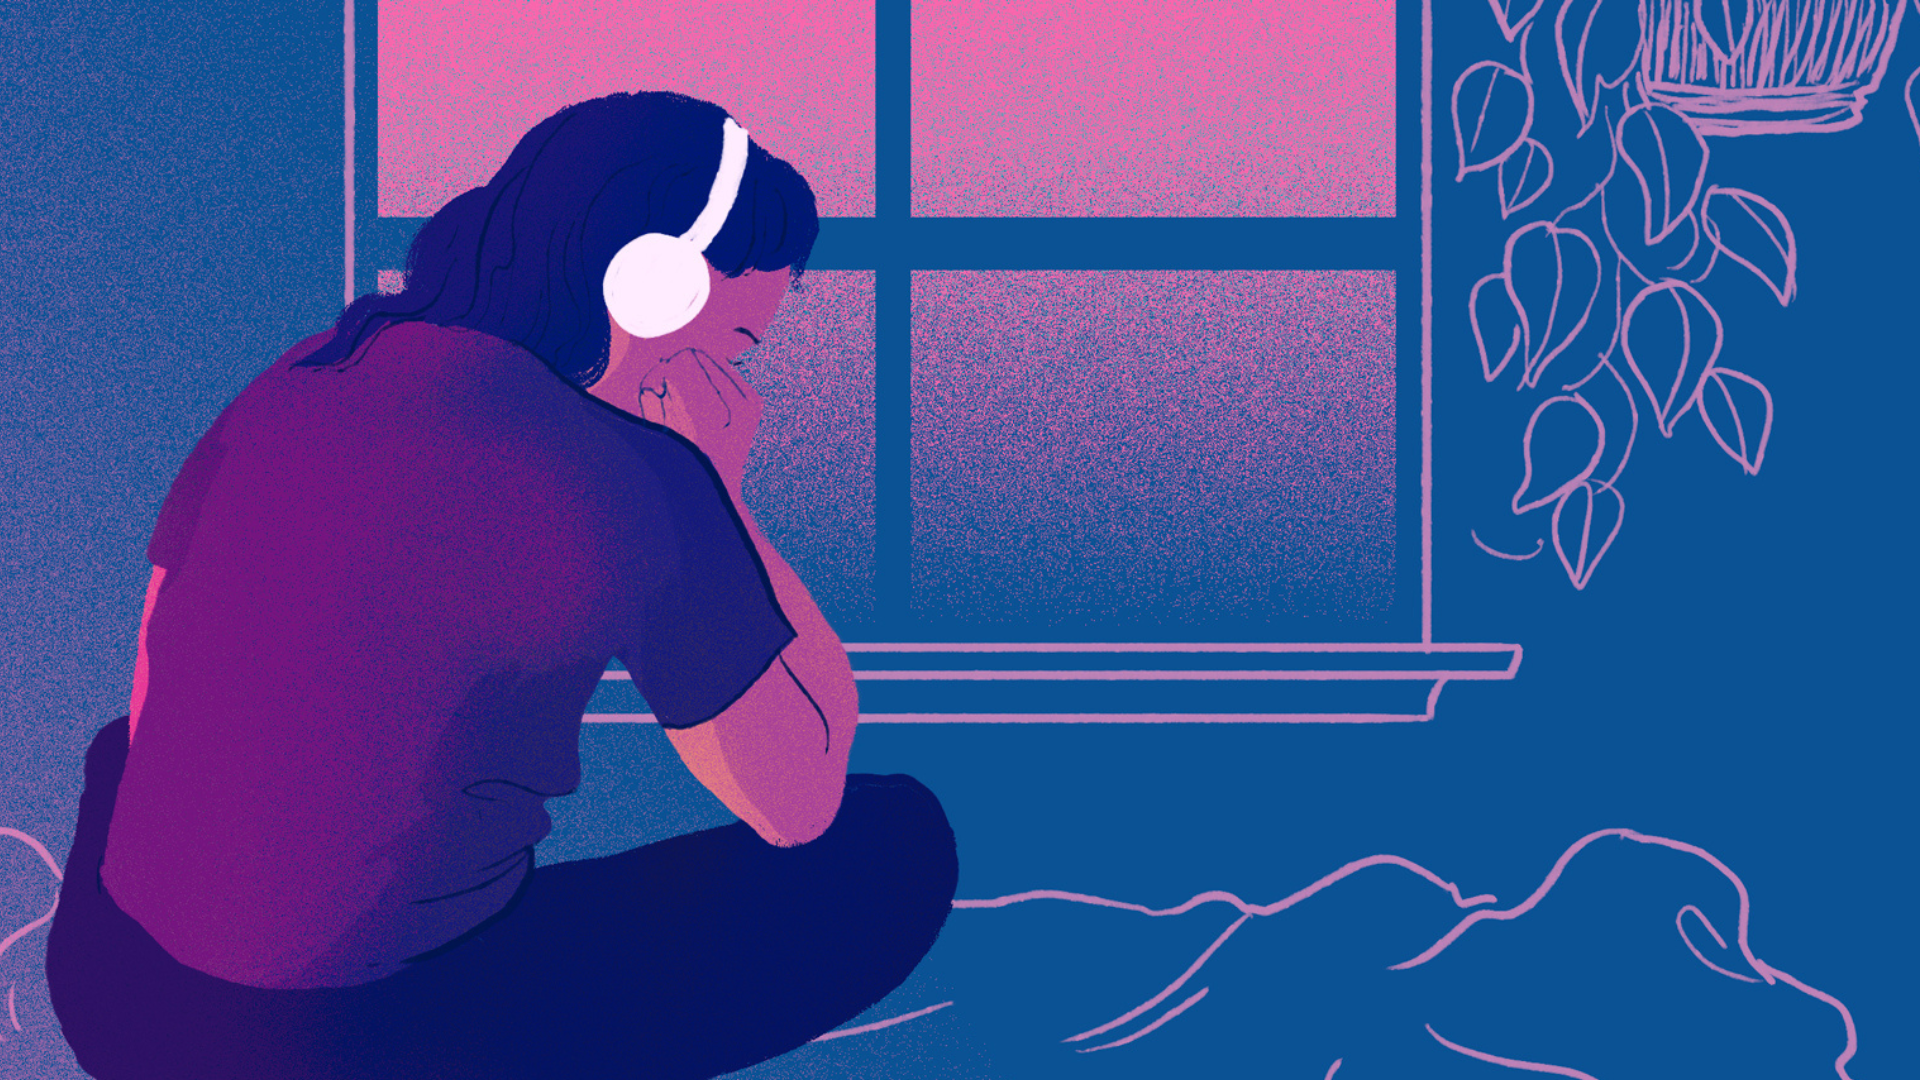 The figure of a woman wears a set of headphones. we see her from behind and sits on a bed in front of a blank window. Colors are dark blues, purples, and pinks.